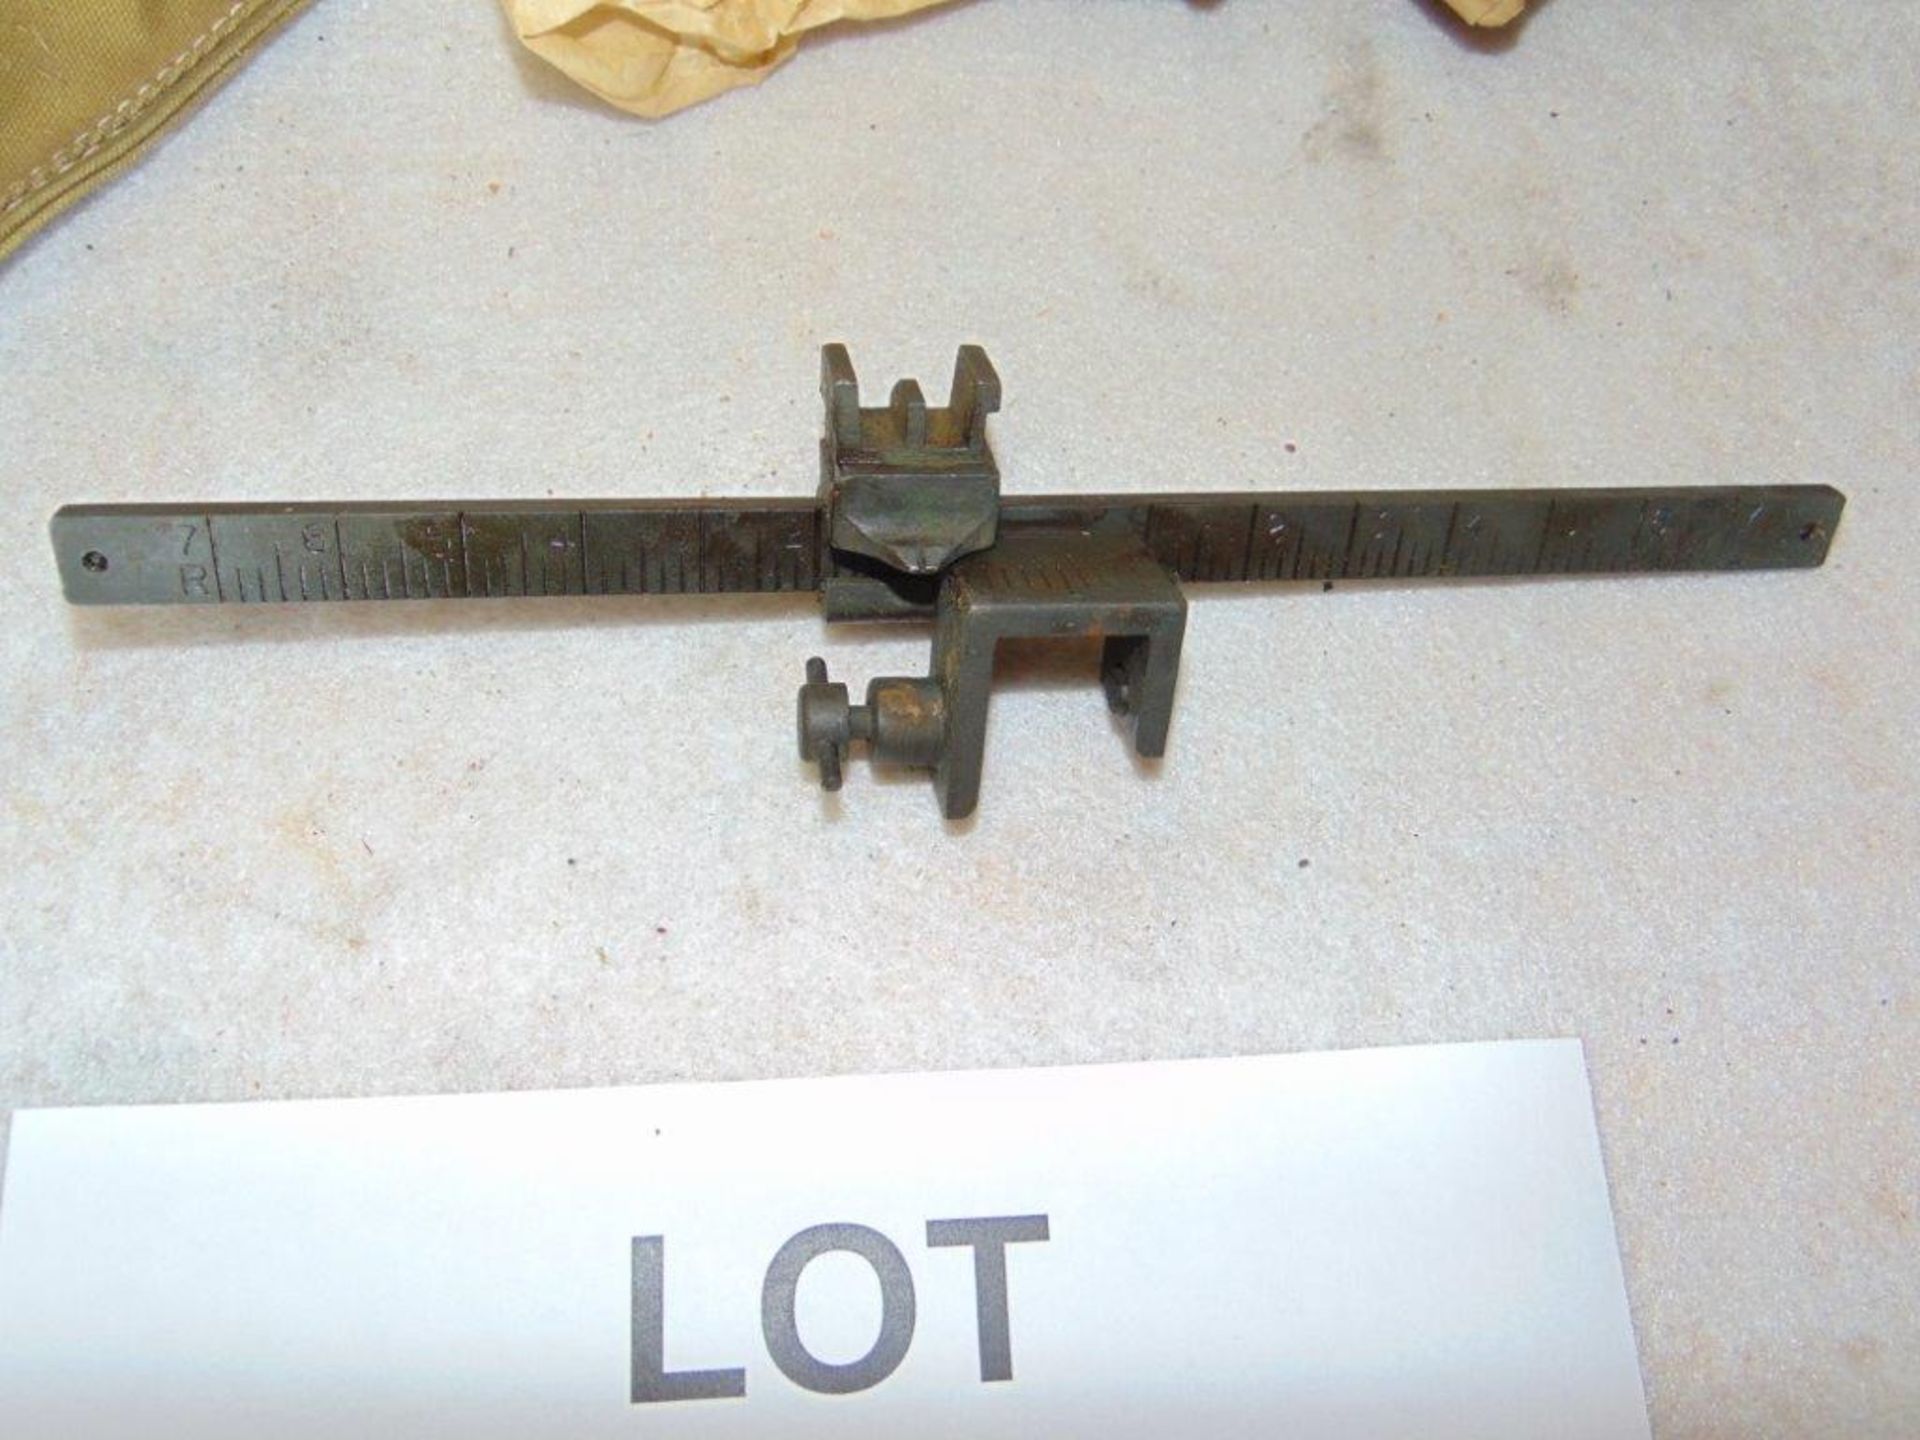 VV Rare original Vickers Machine Gun Long Range Sight unissued in packing and pouch dated 1941 - Image 2 of 3